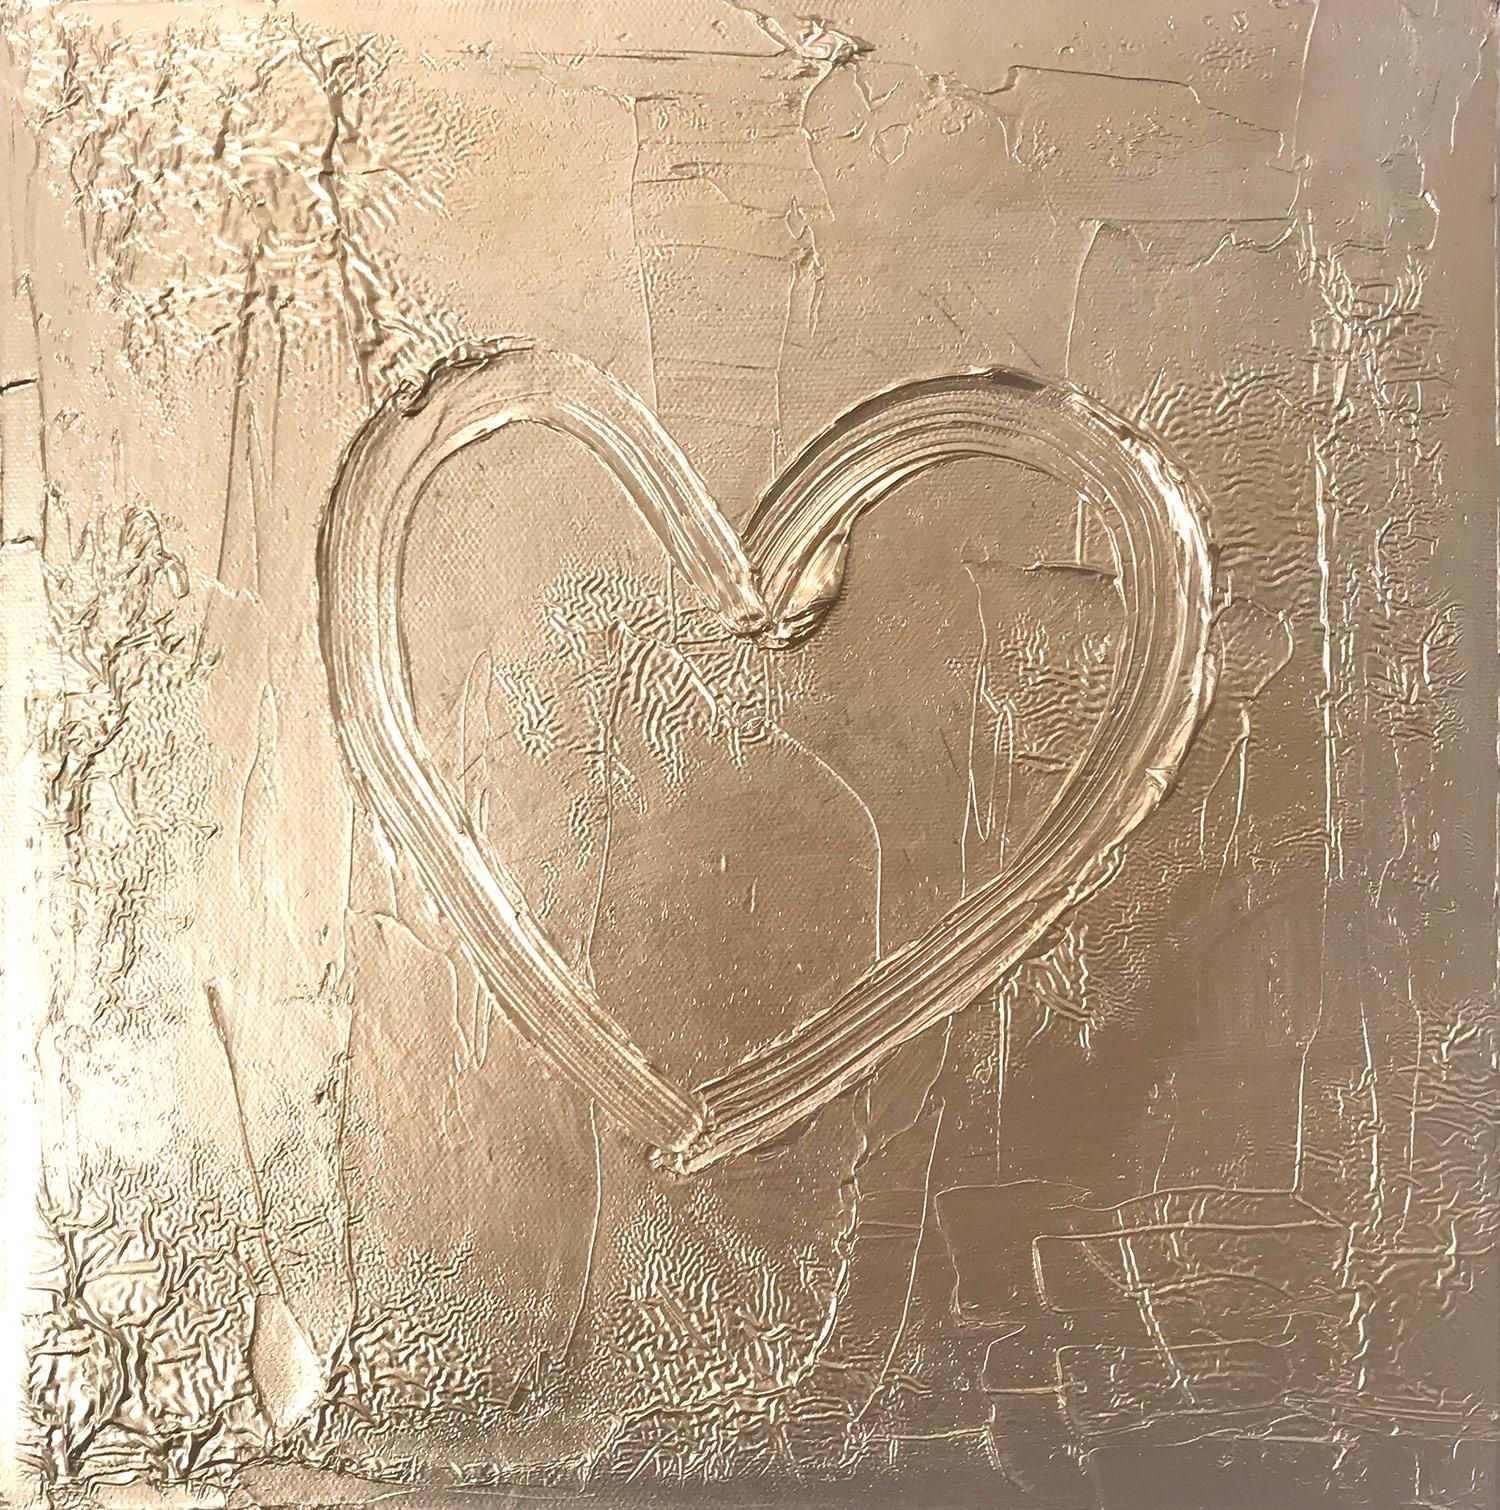 Cindy Shaoul Abstract Painting - "My Gold Heart" Contemporary Gold Textured Oil Painting on Canvas